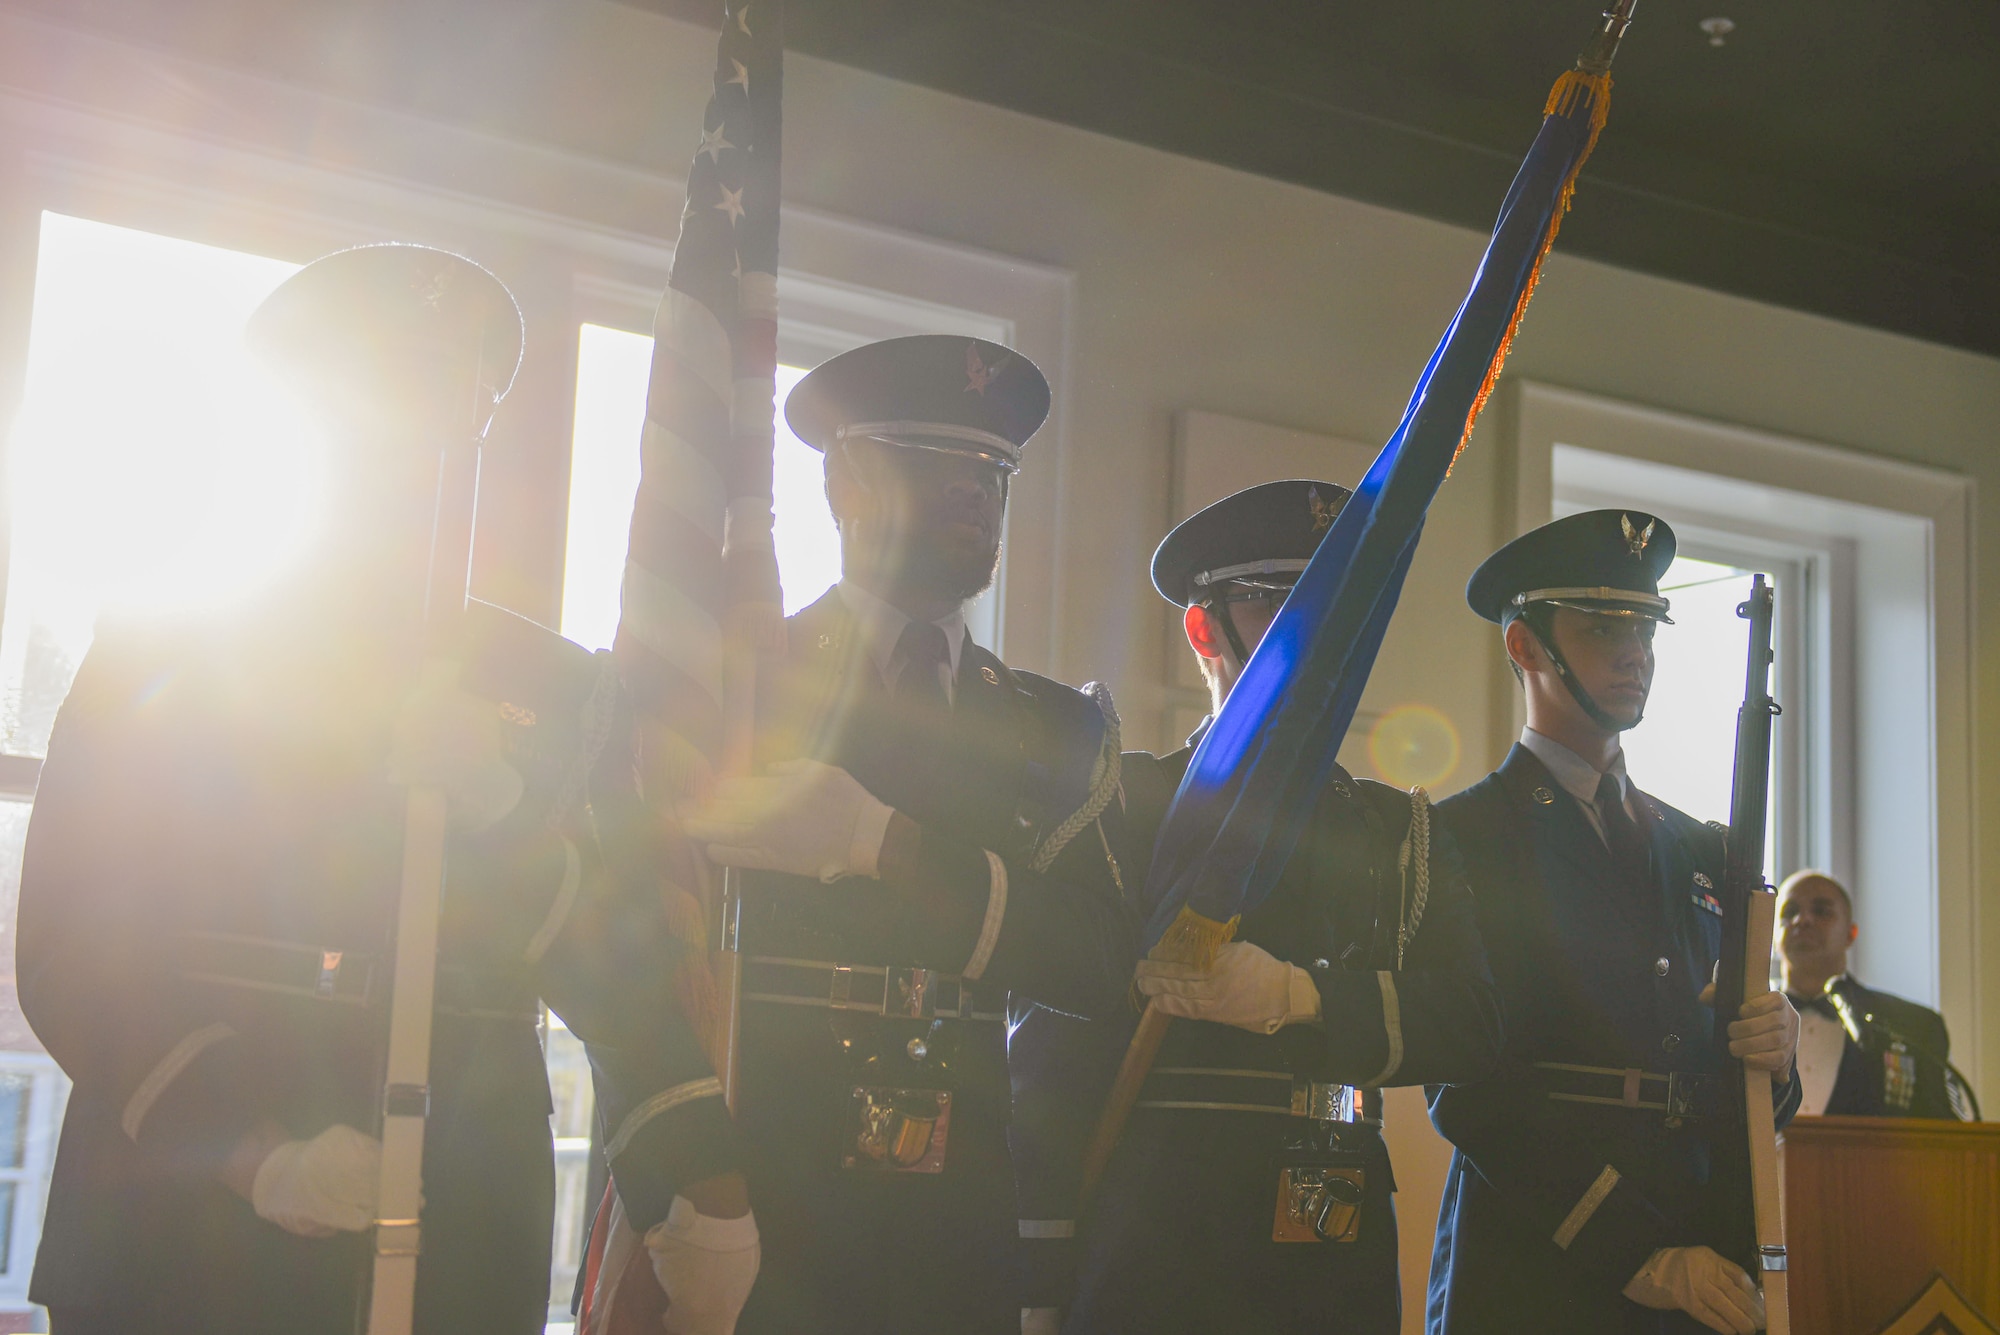 The Moody Air Force Base honor guard presents the colors during a Chief Recognition Ceremony in Valdosta, Georgia, March 16, 2023. The color guard performs at a multitude of ceremonies and events. It’s a prestigious duty that dates to the beginning of the United States of America. U.S. Air Force Photo by Airman 1st Sir Wyrick)